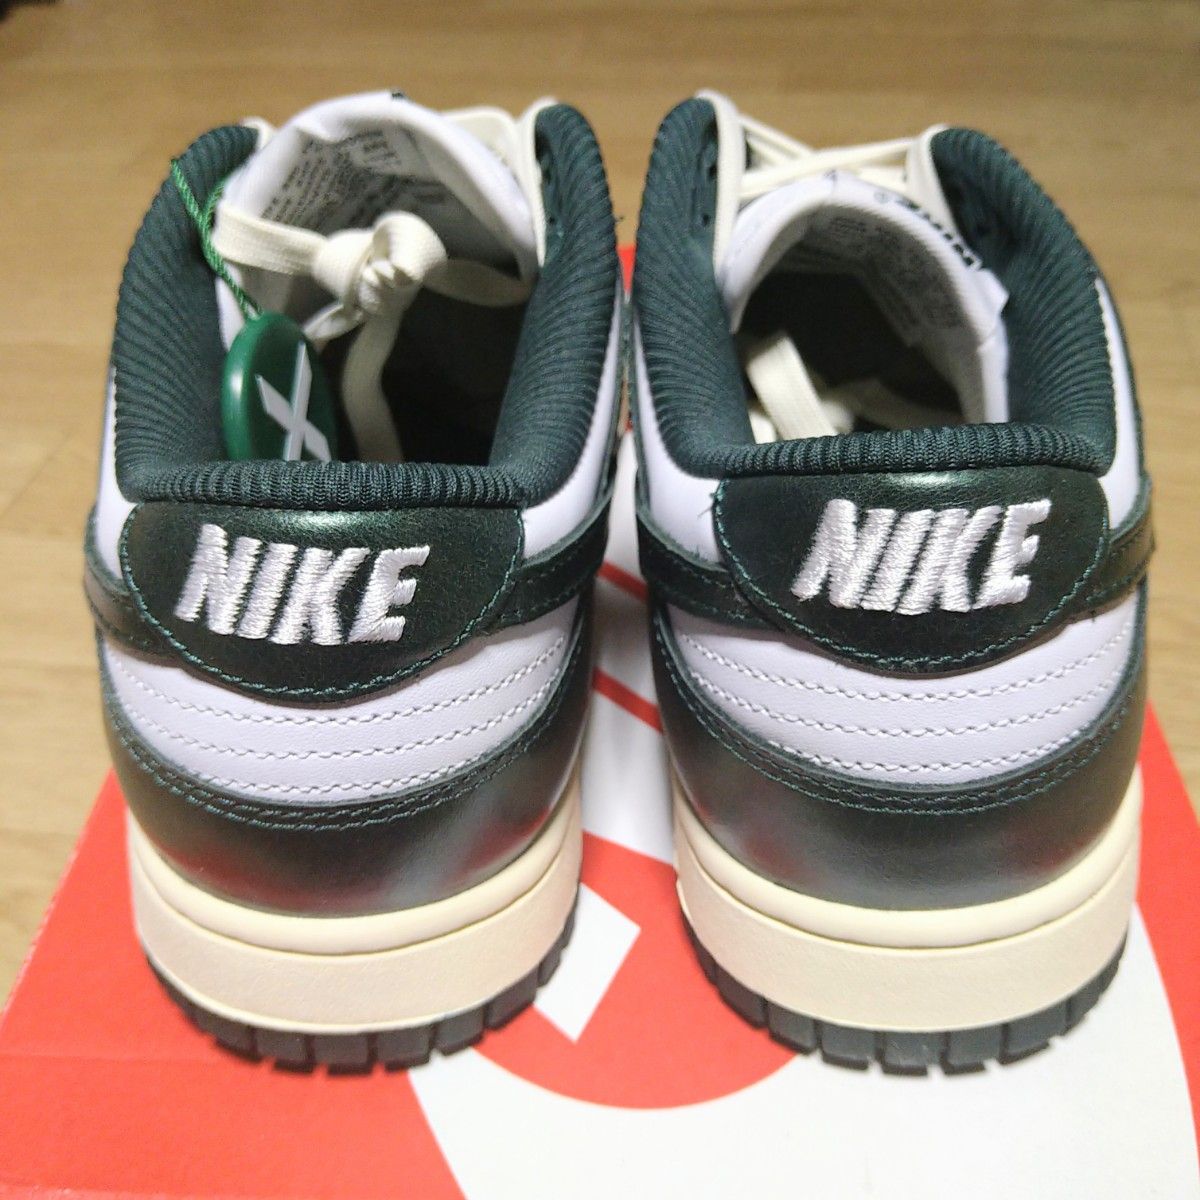 Nike WMNS Dunk Low Vintage Green ナイキ ウィメンズ ダンク ロー ヴィンテージグリーン 27cm